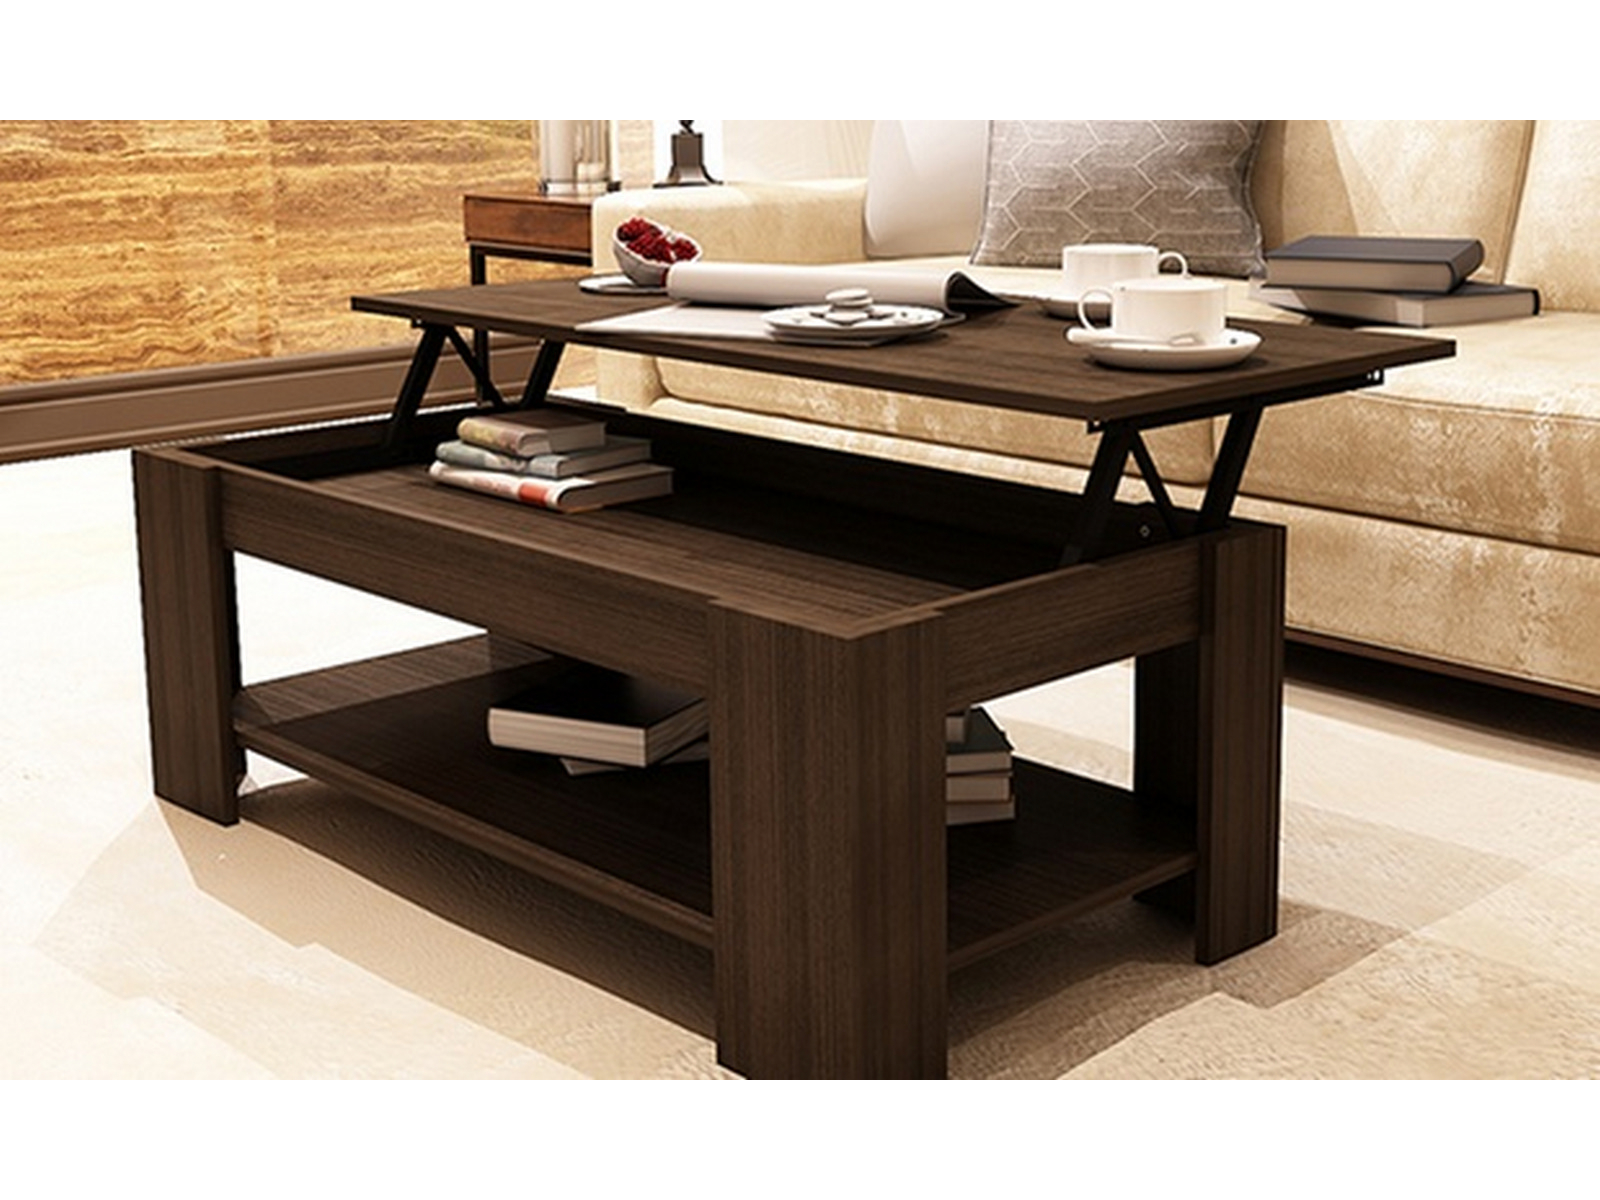 New Caspian Espresso Lift Up Top Coffee Table With Storage Shelf inside proportions 1600 X 1200